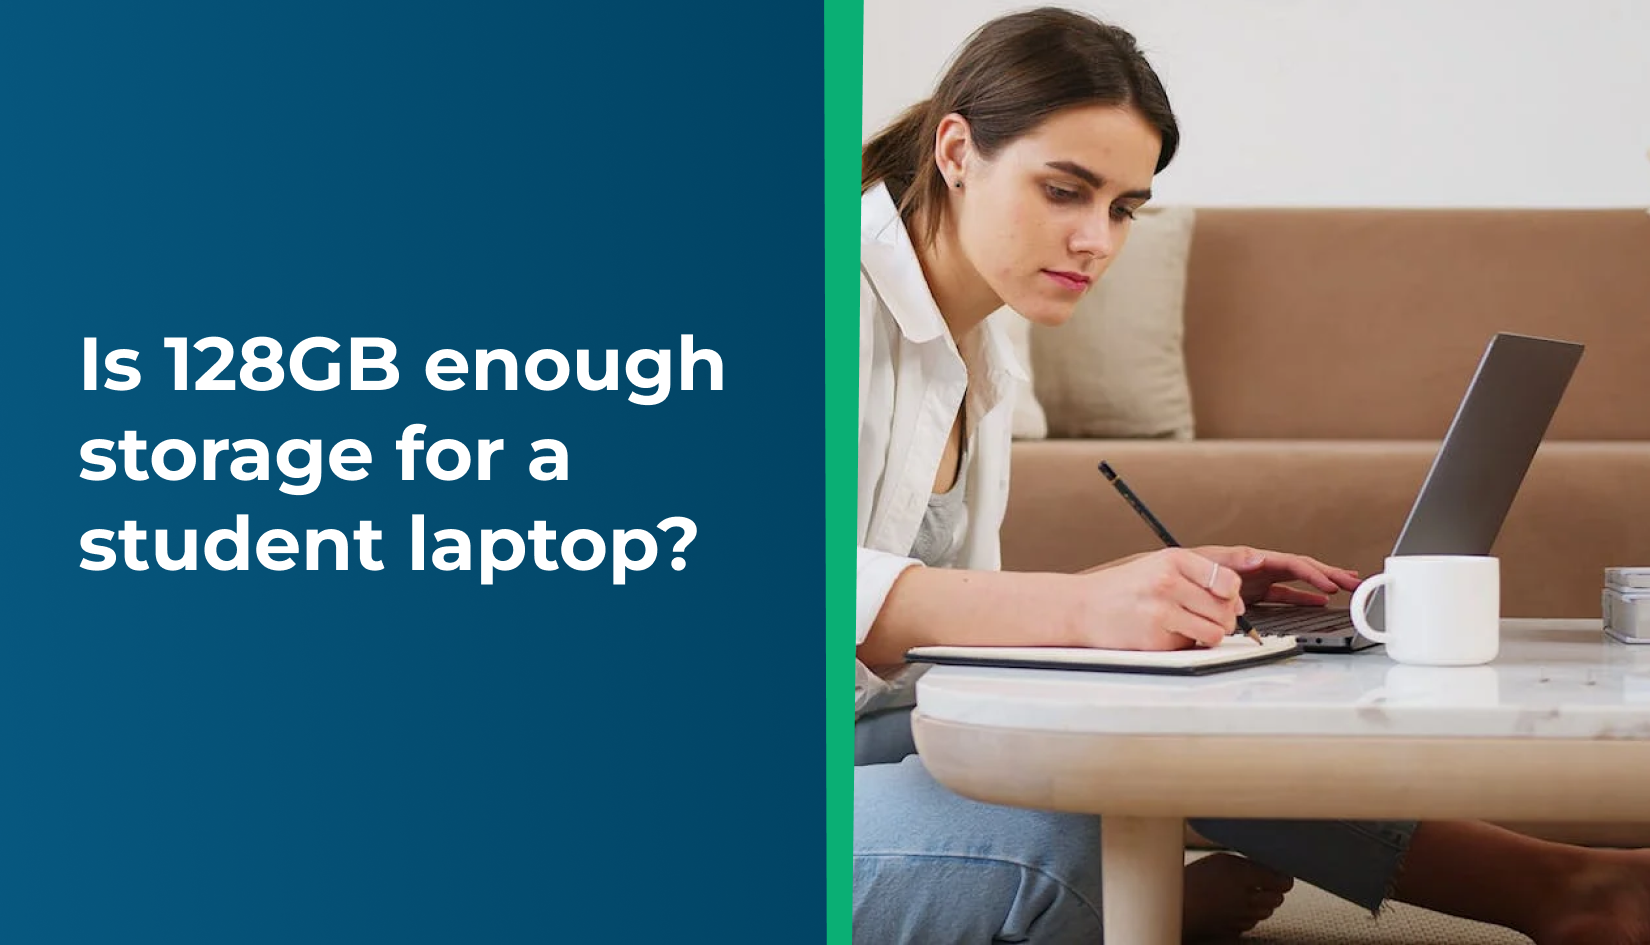 Is 128GB enough storage for a student laptop?